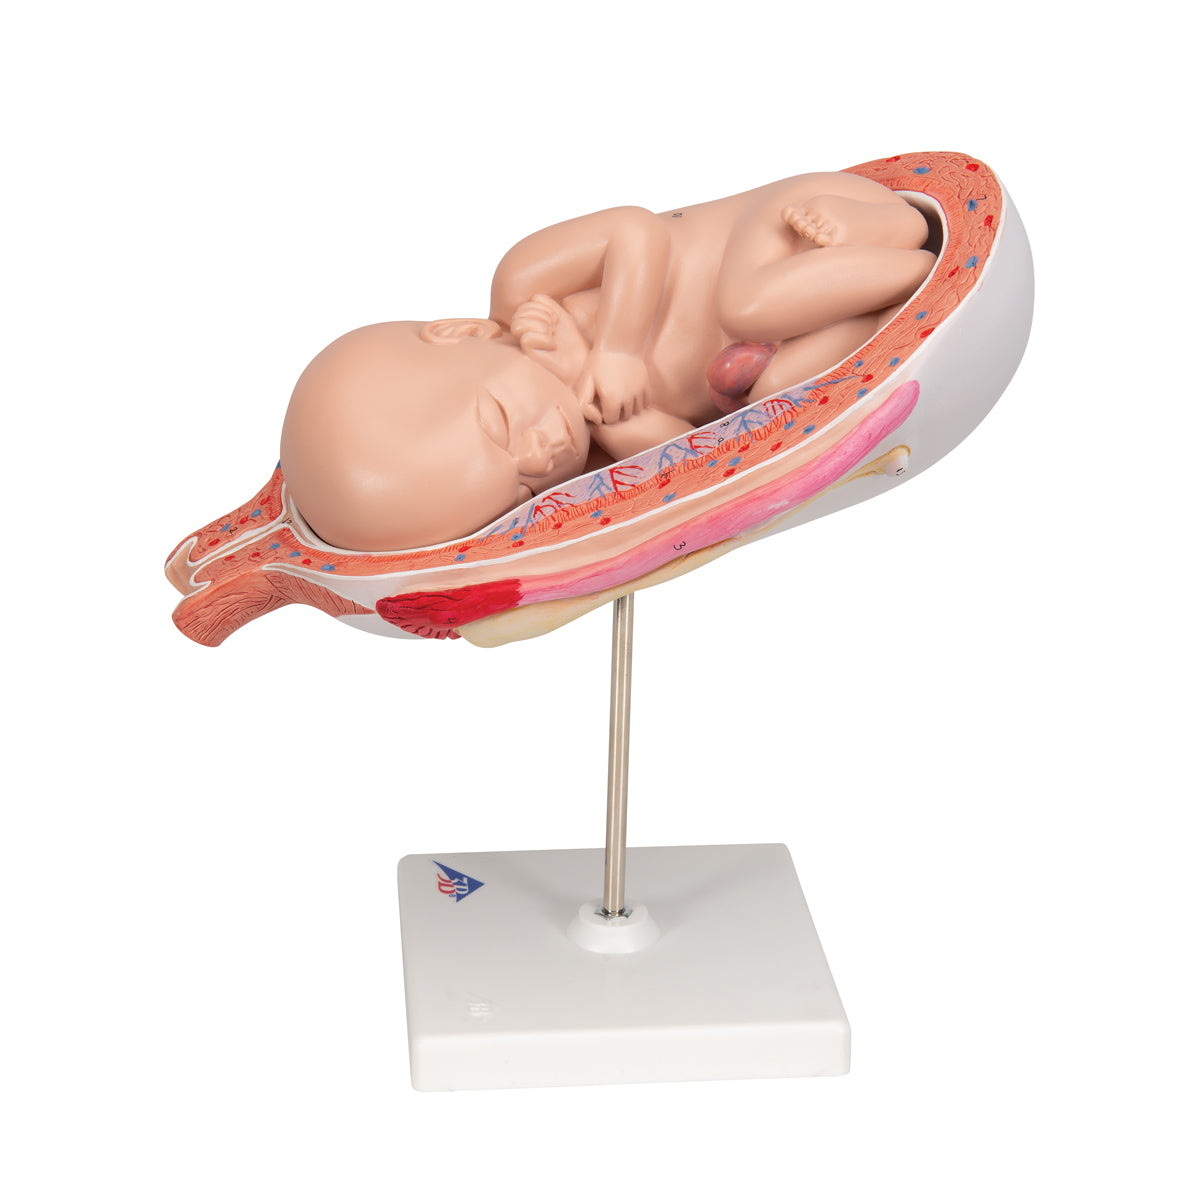 Detailed model of a fetus in the womb corresponding to the 7th month of pregnancy